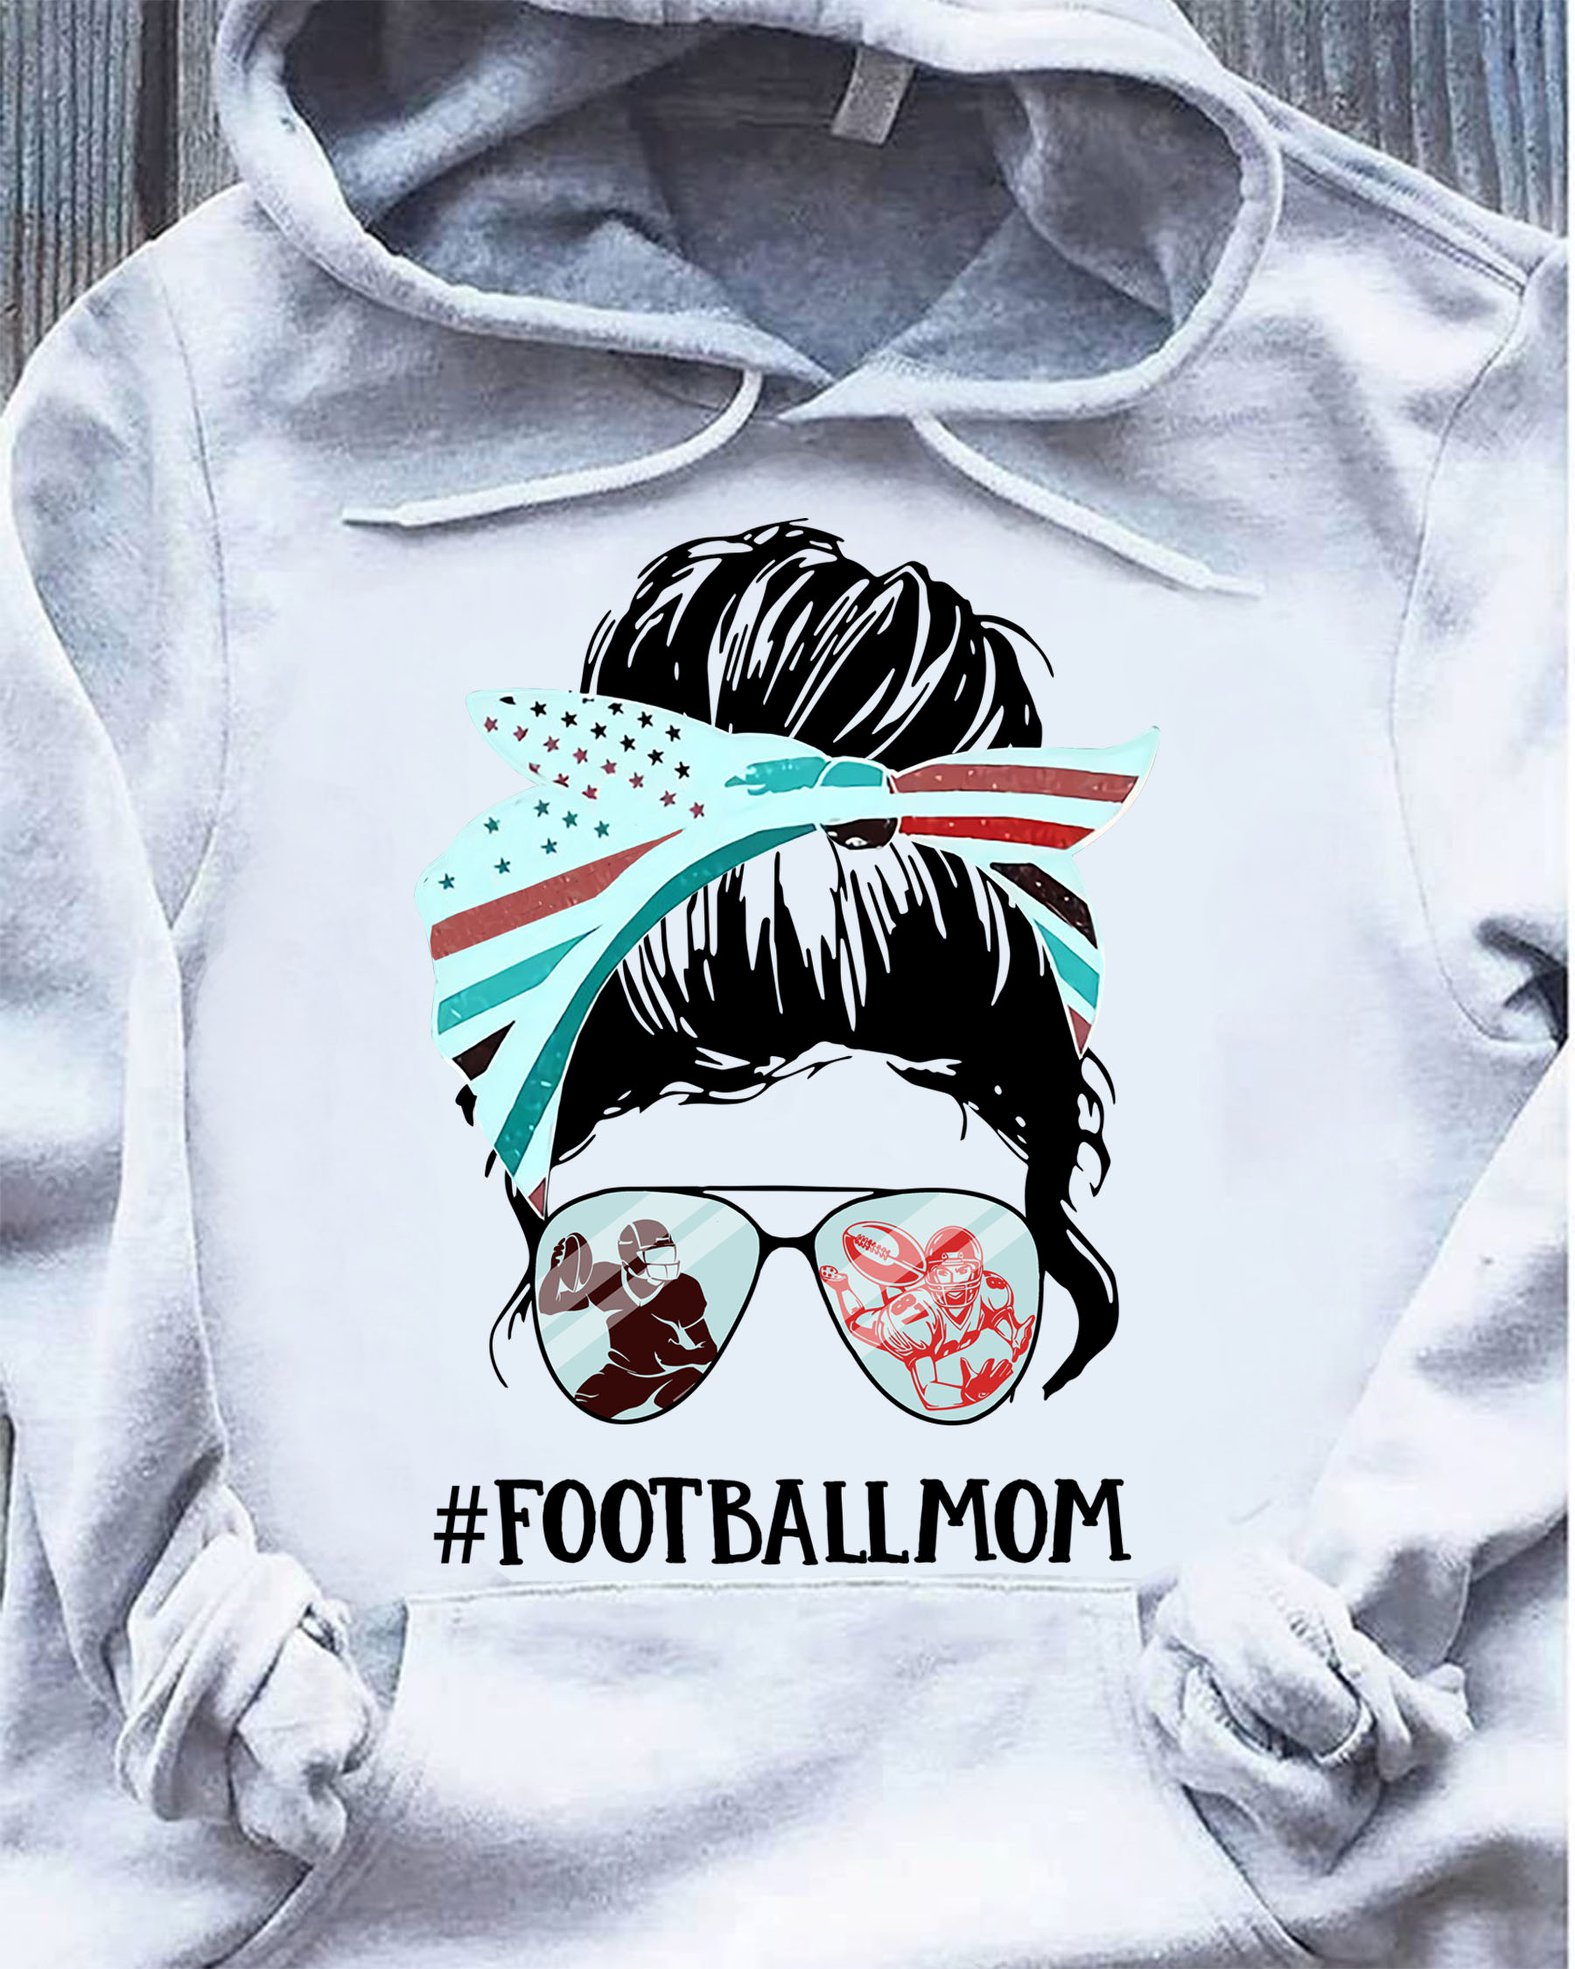 Football mom - Mother's day gift, mother loves football